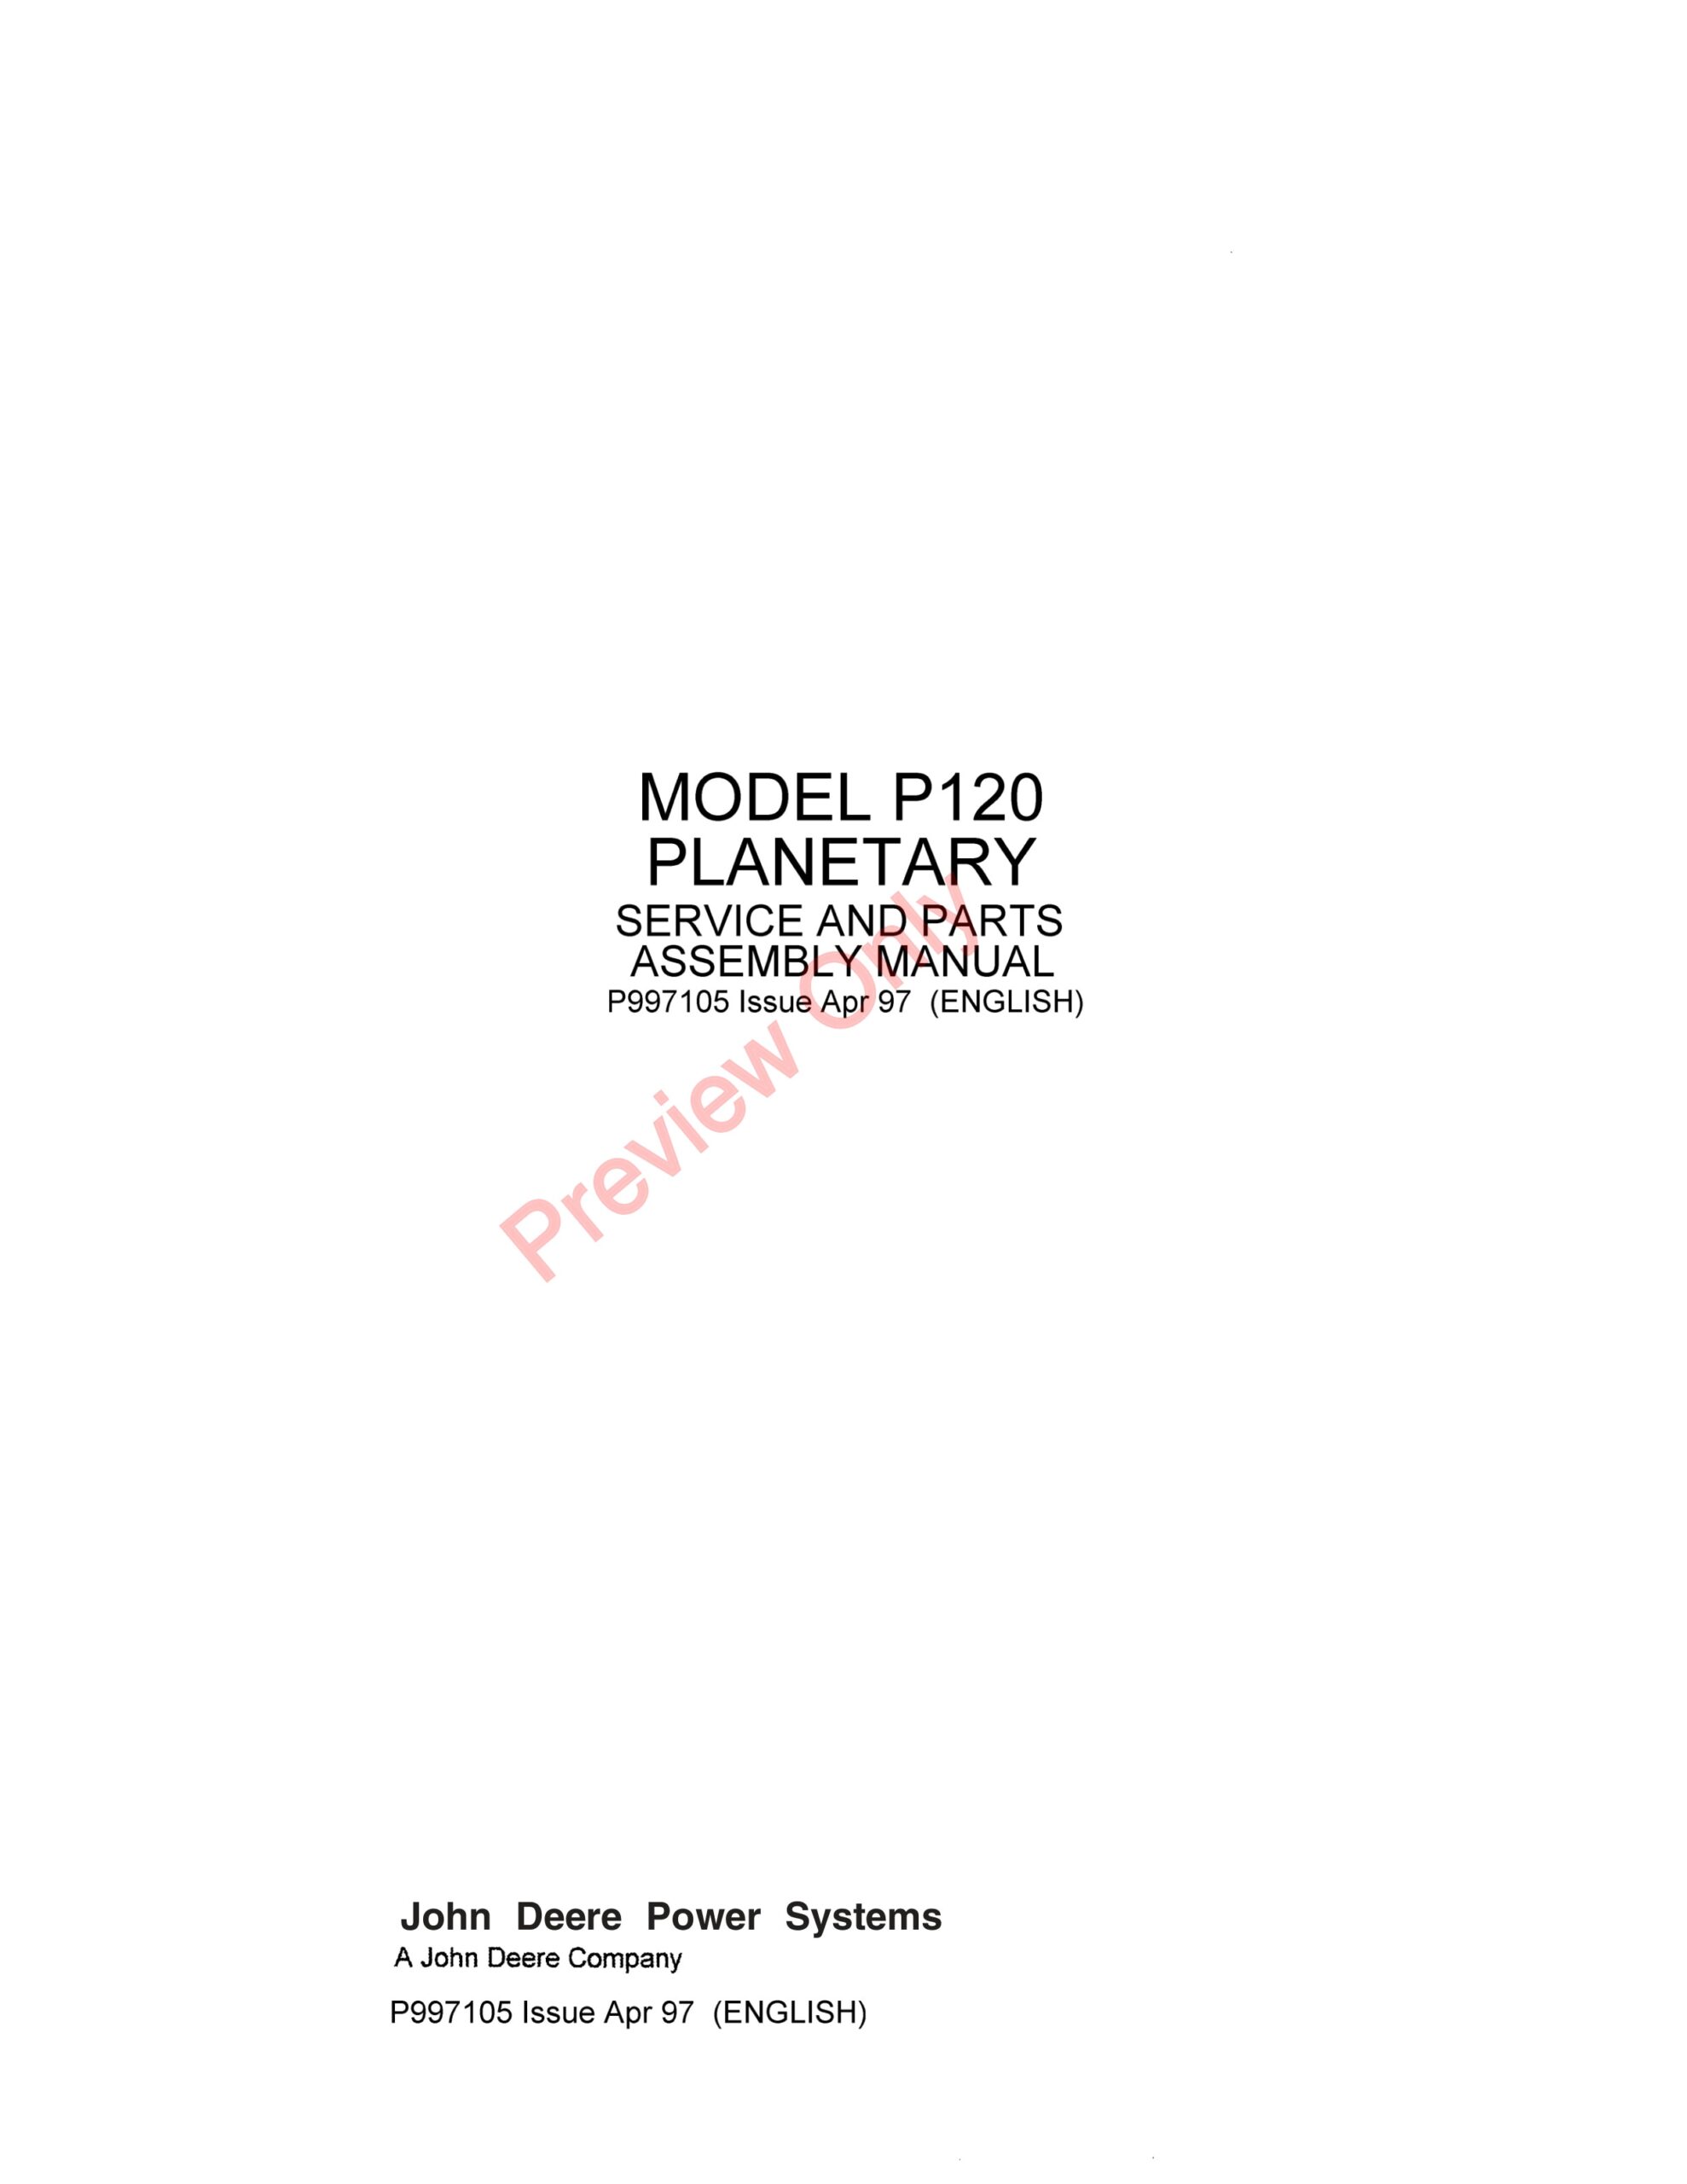 John Deere Model P120 Planetary Service and Parts Assembly Manual P997105 01APR97-1